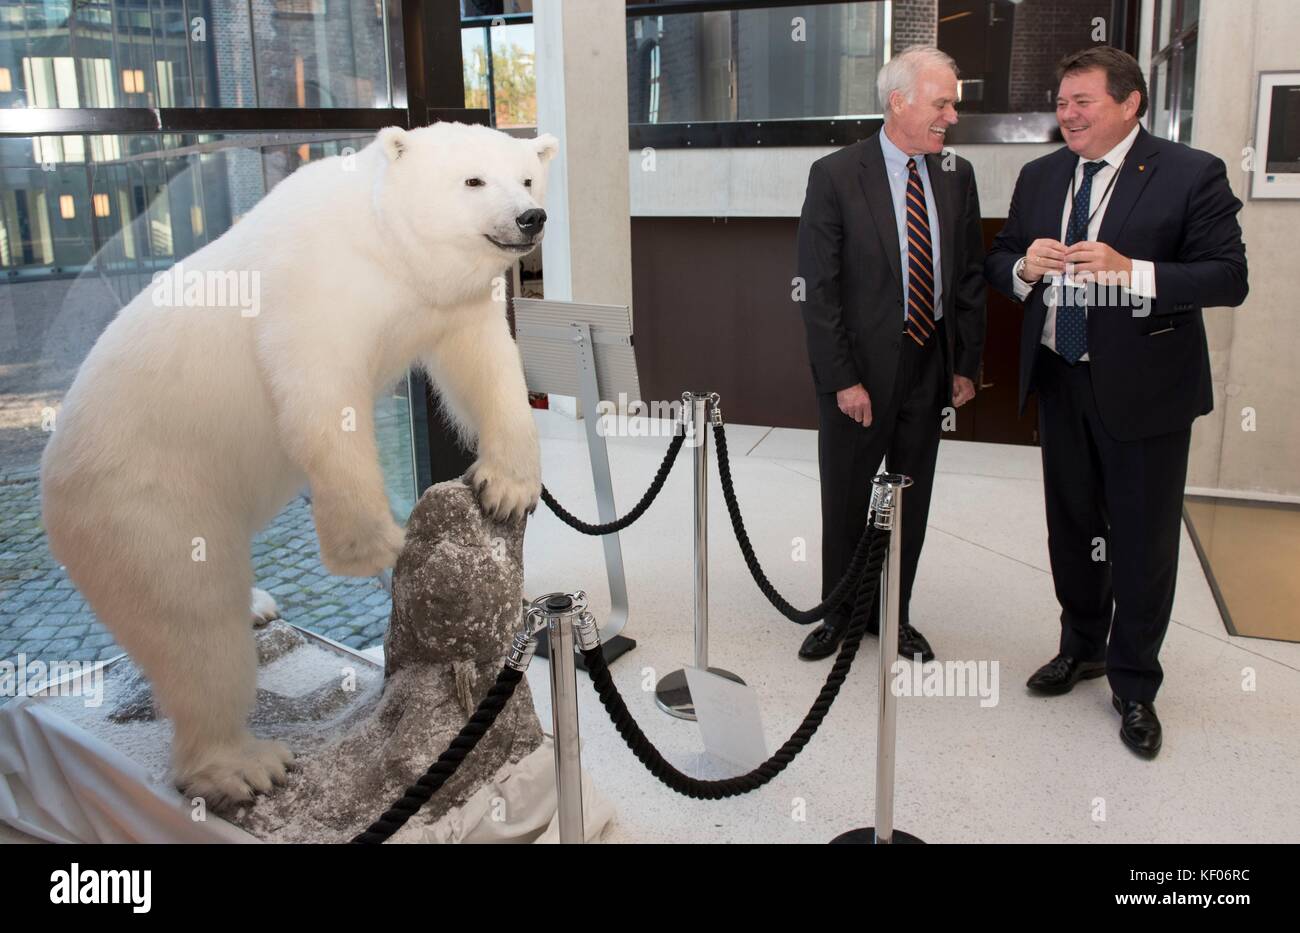 U.S. Navy Secretary Richard Spencer (left) and Norwegian State Secretary Oystein Bo check out a taxidermy polar bear statue at the Ministry of Defense Headquarters October 9, 2017 in Oslo, Norway. Stock Photo